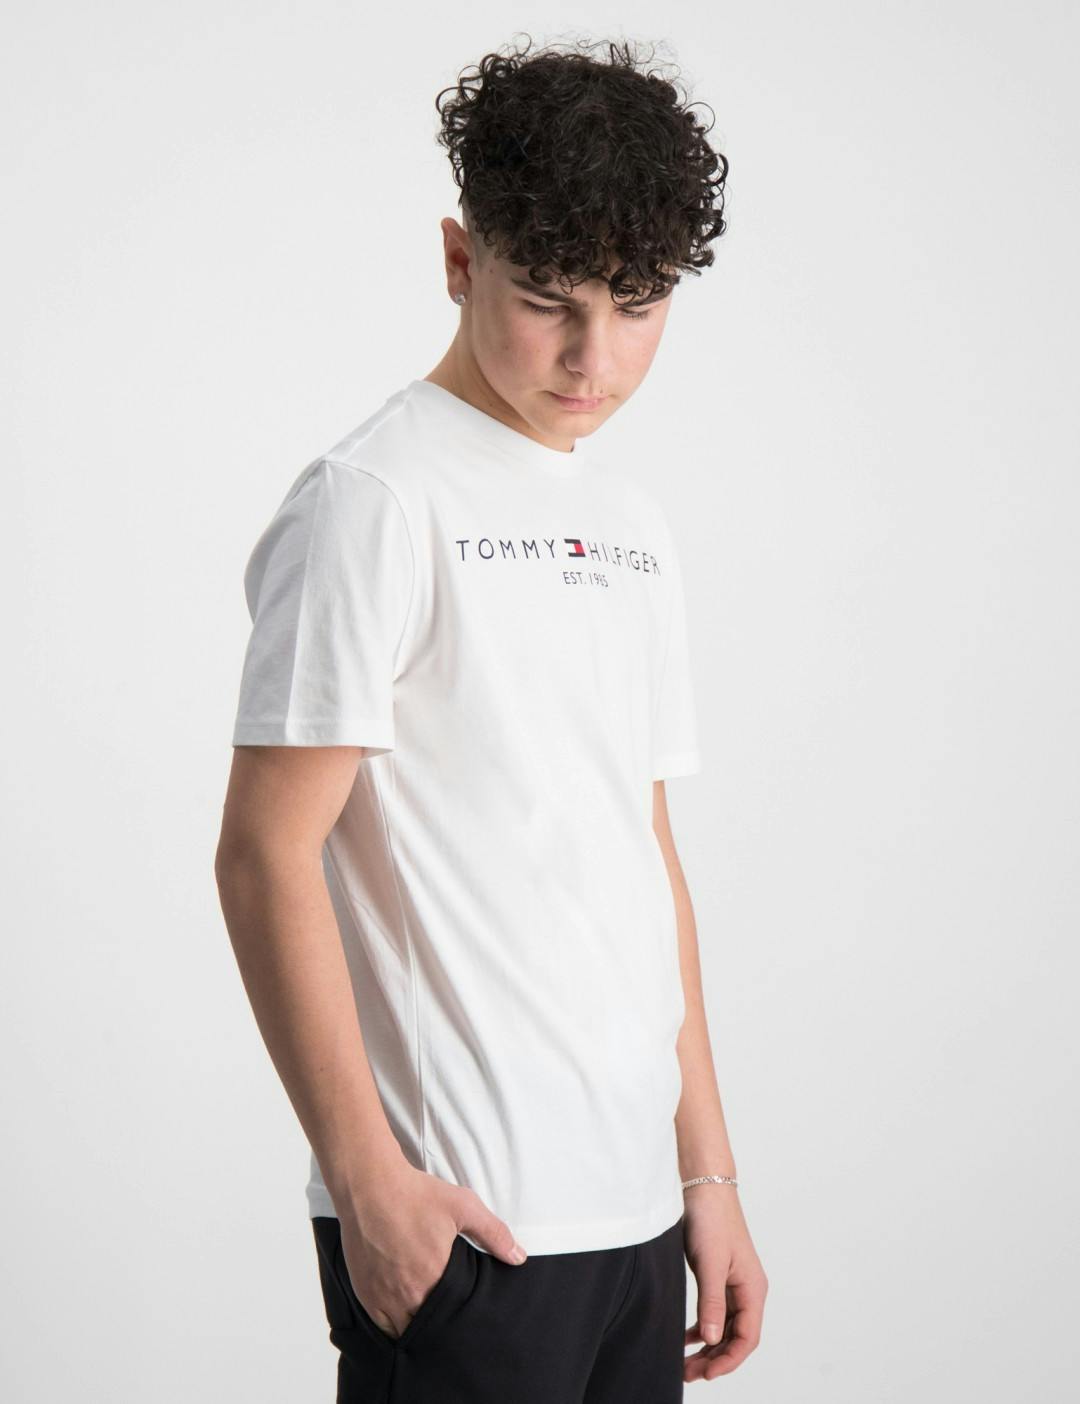 ESSENTIAL TEE S/S